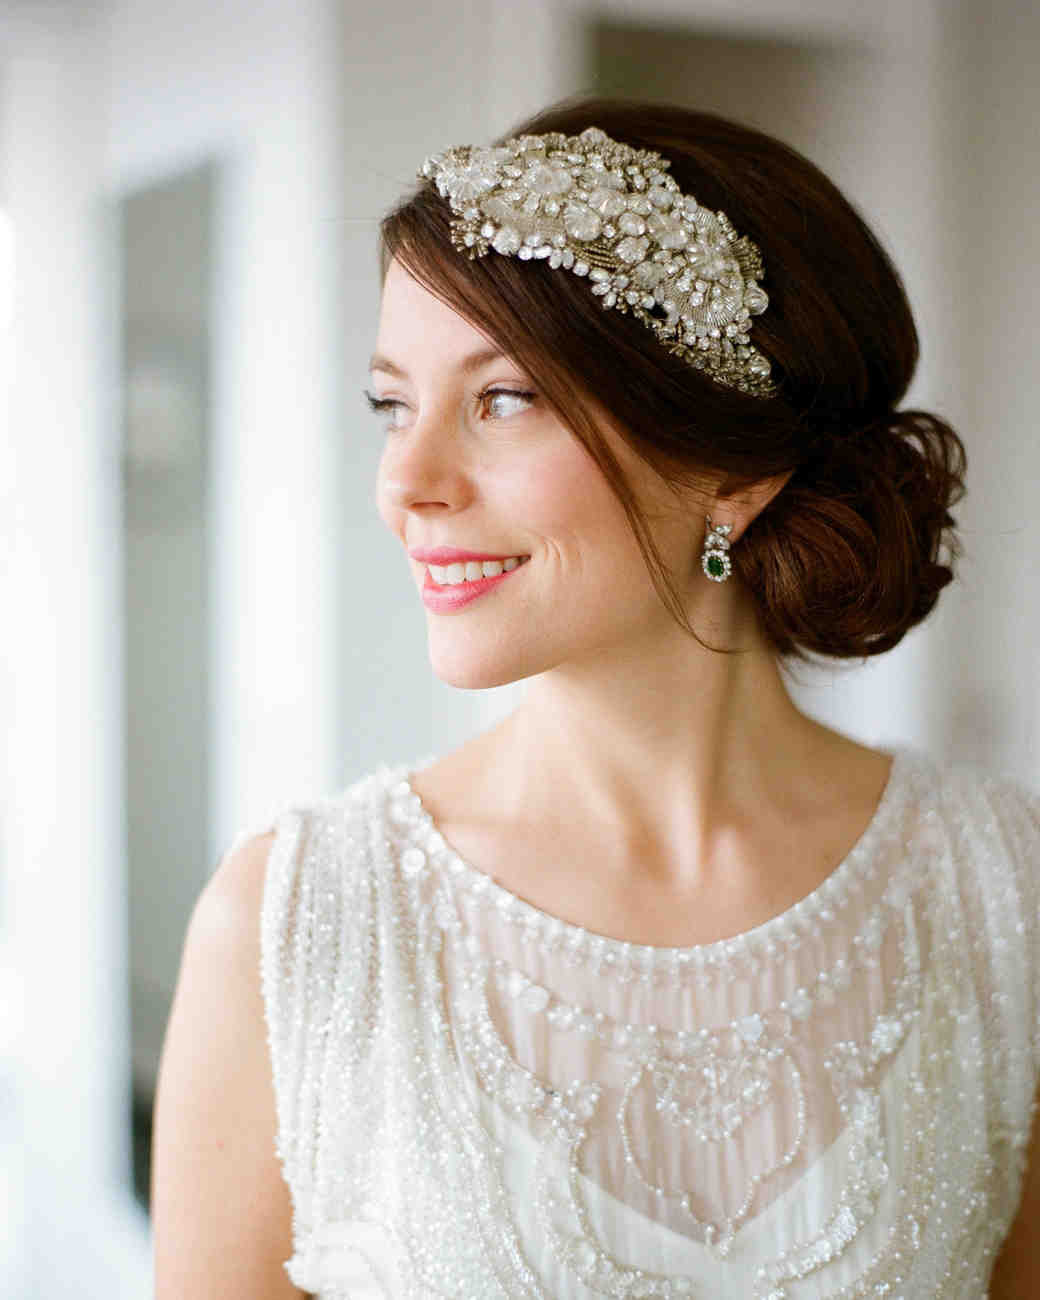 Wedding Bridal Hairstyles
 29 Cool Wedding Hairstyles for the Modern Bride